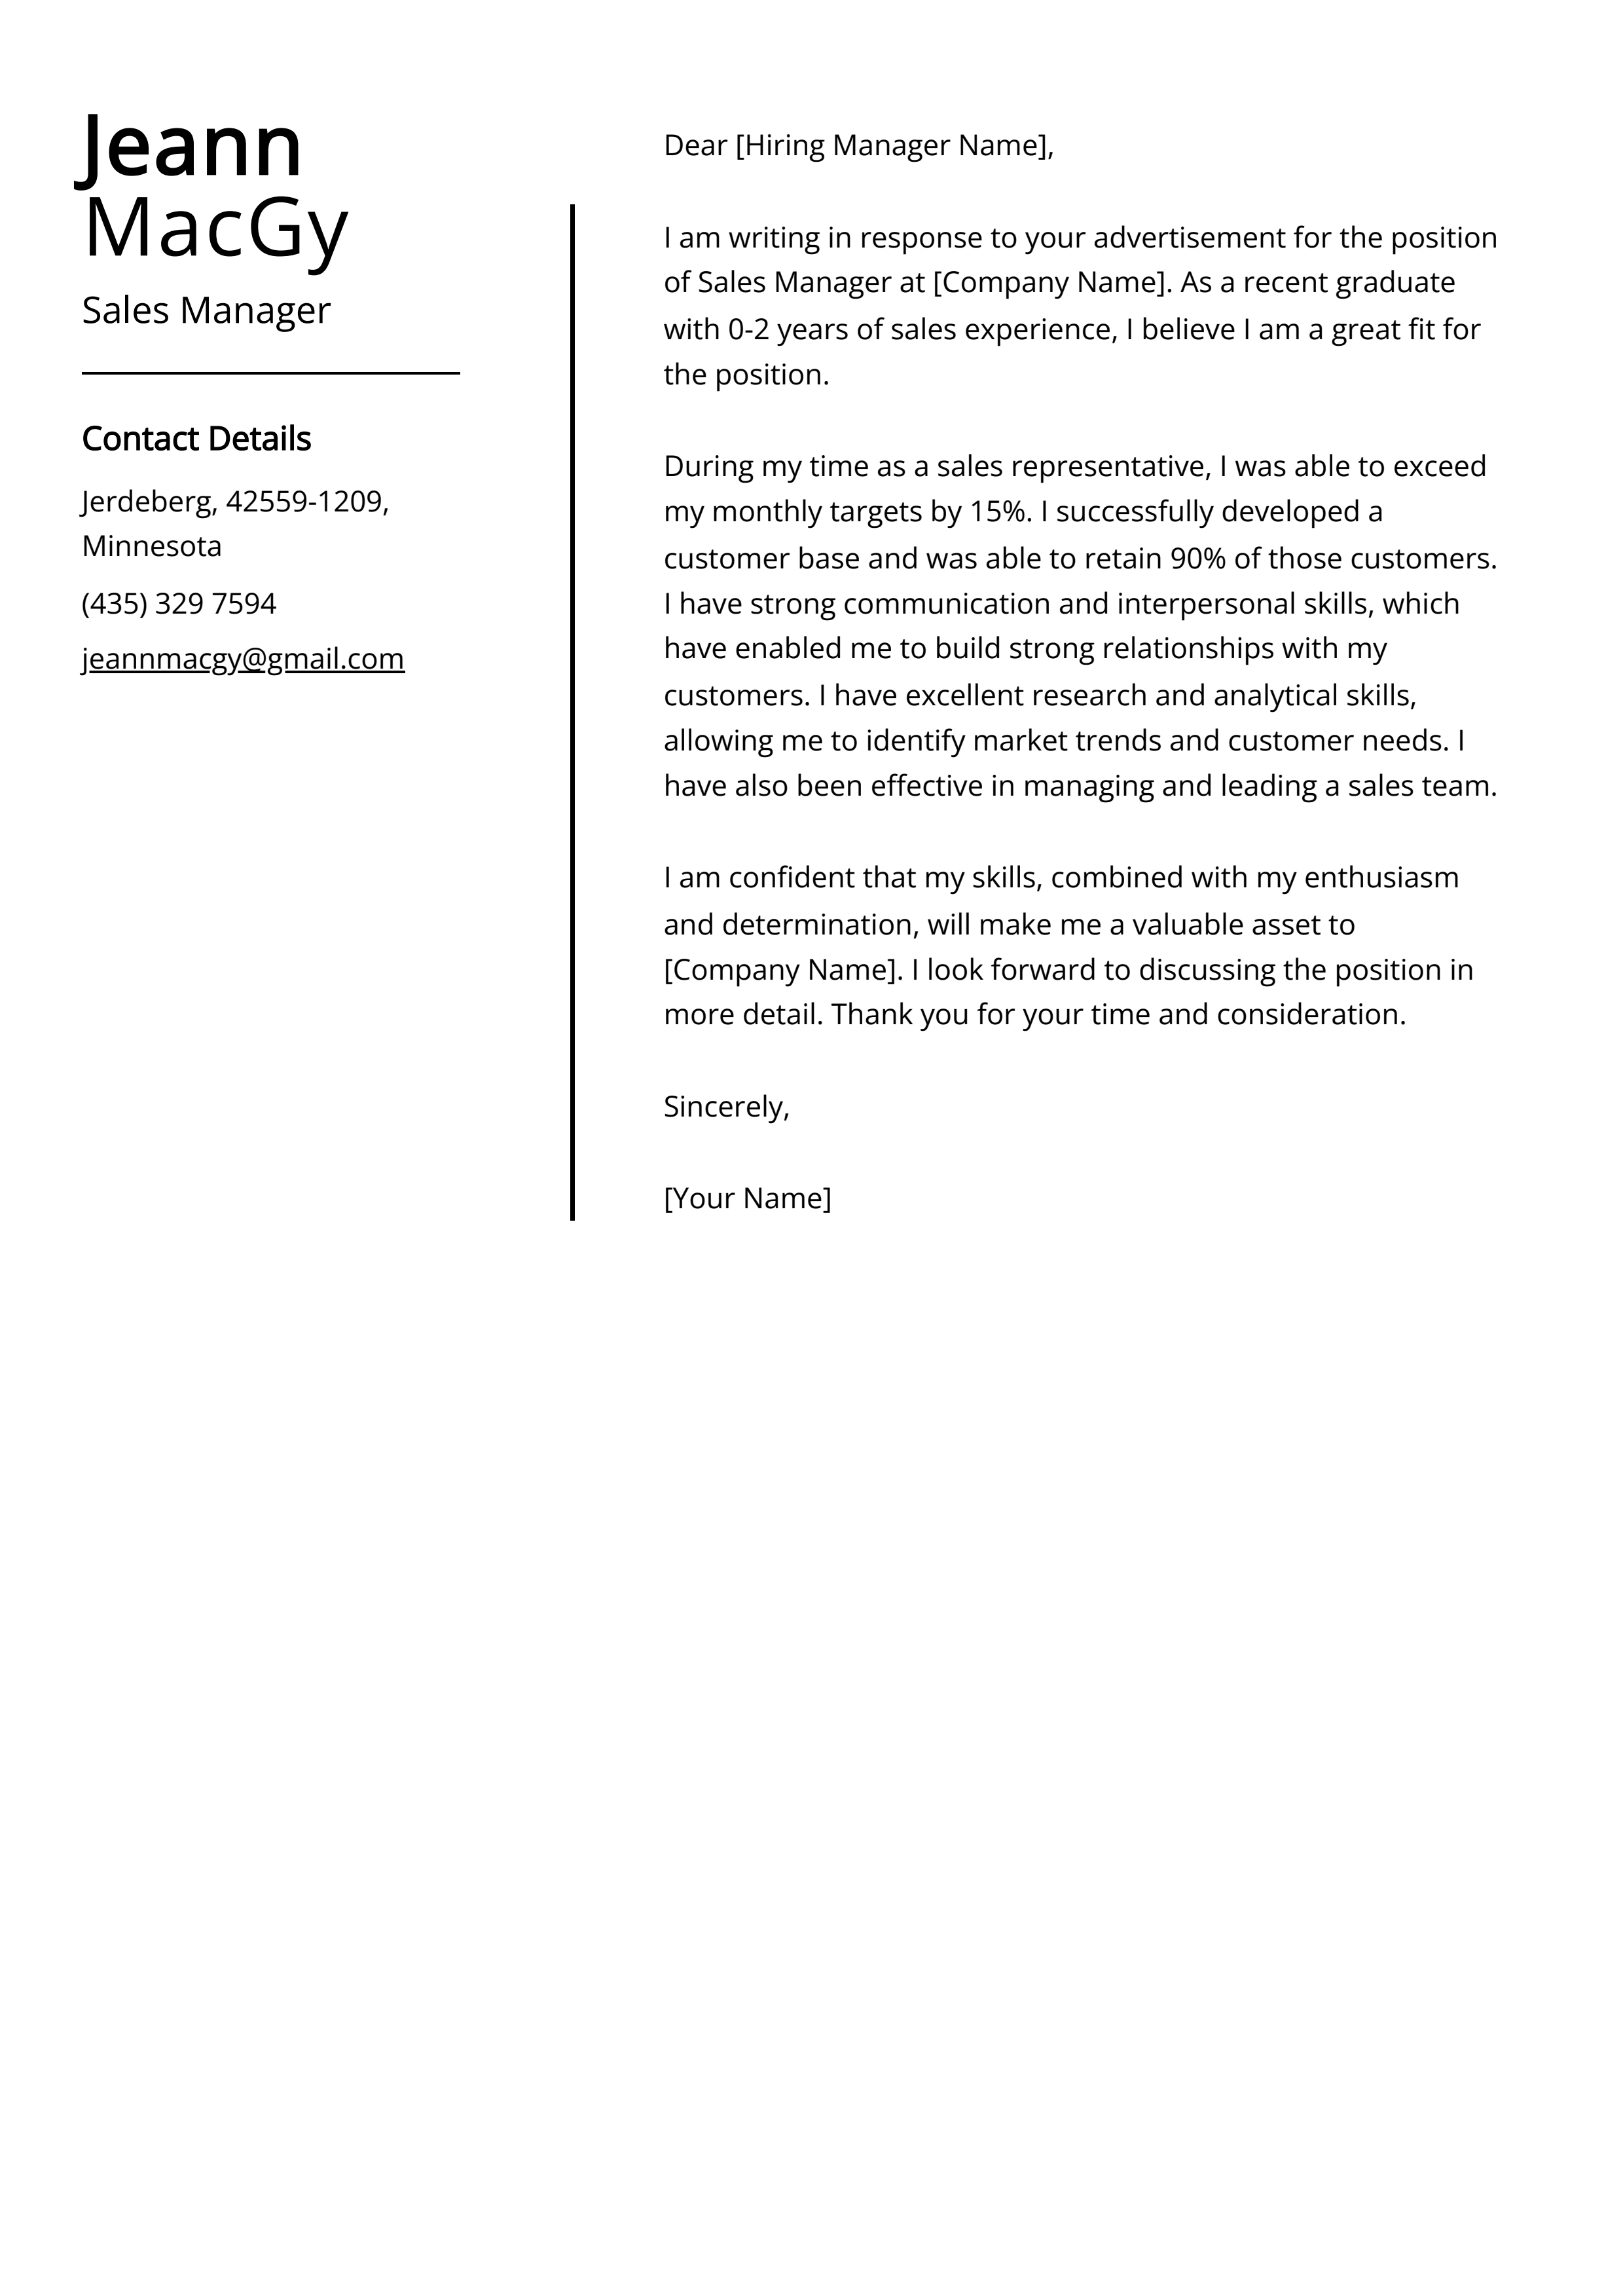 Experienced Sales Manager Cover Letter Example